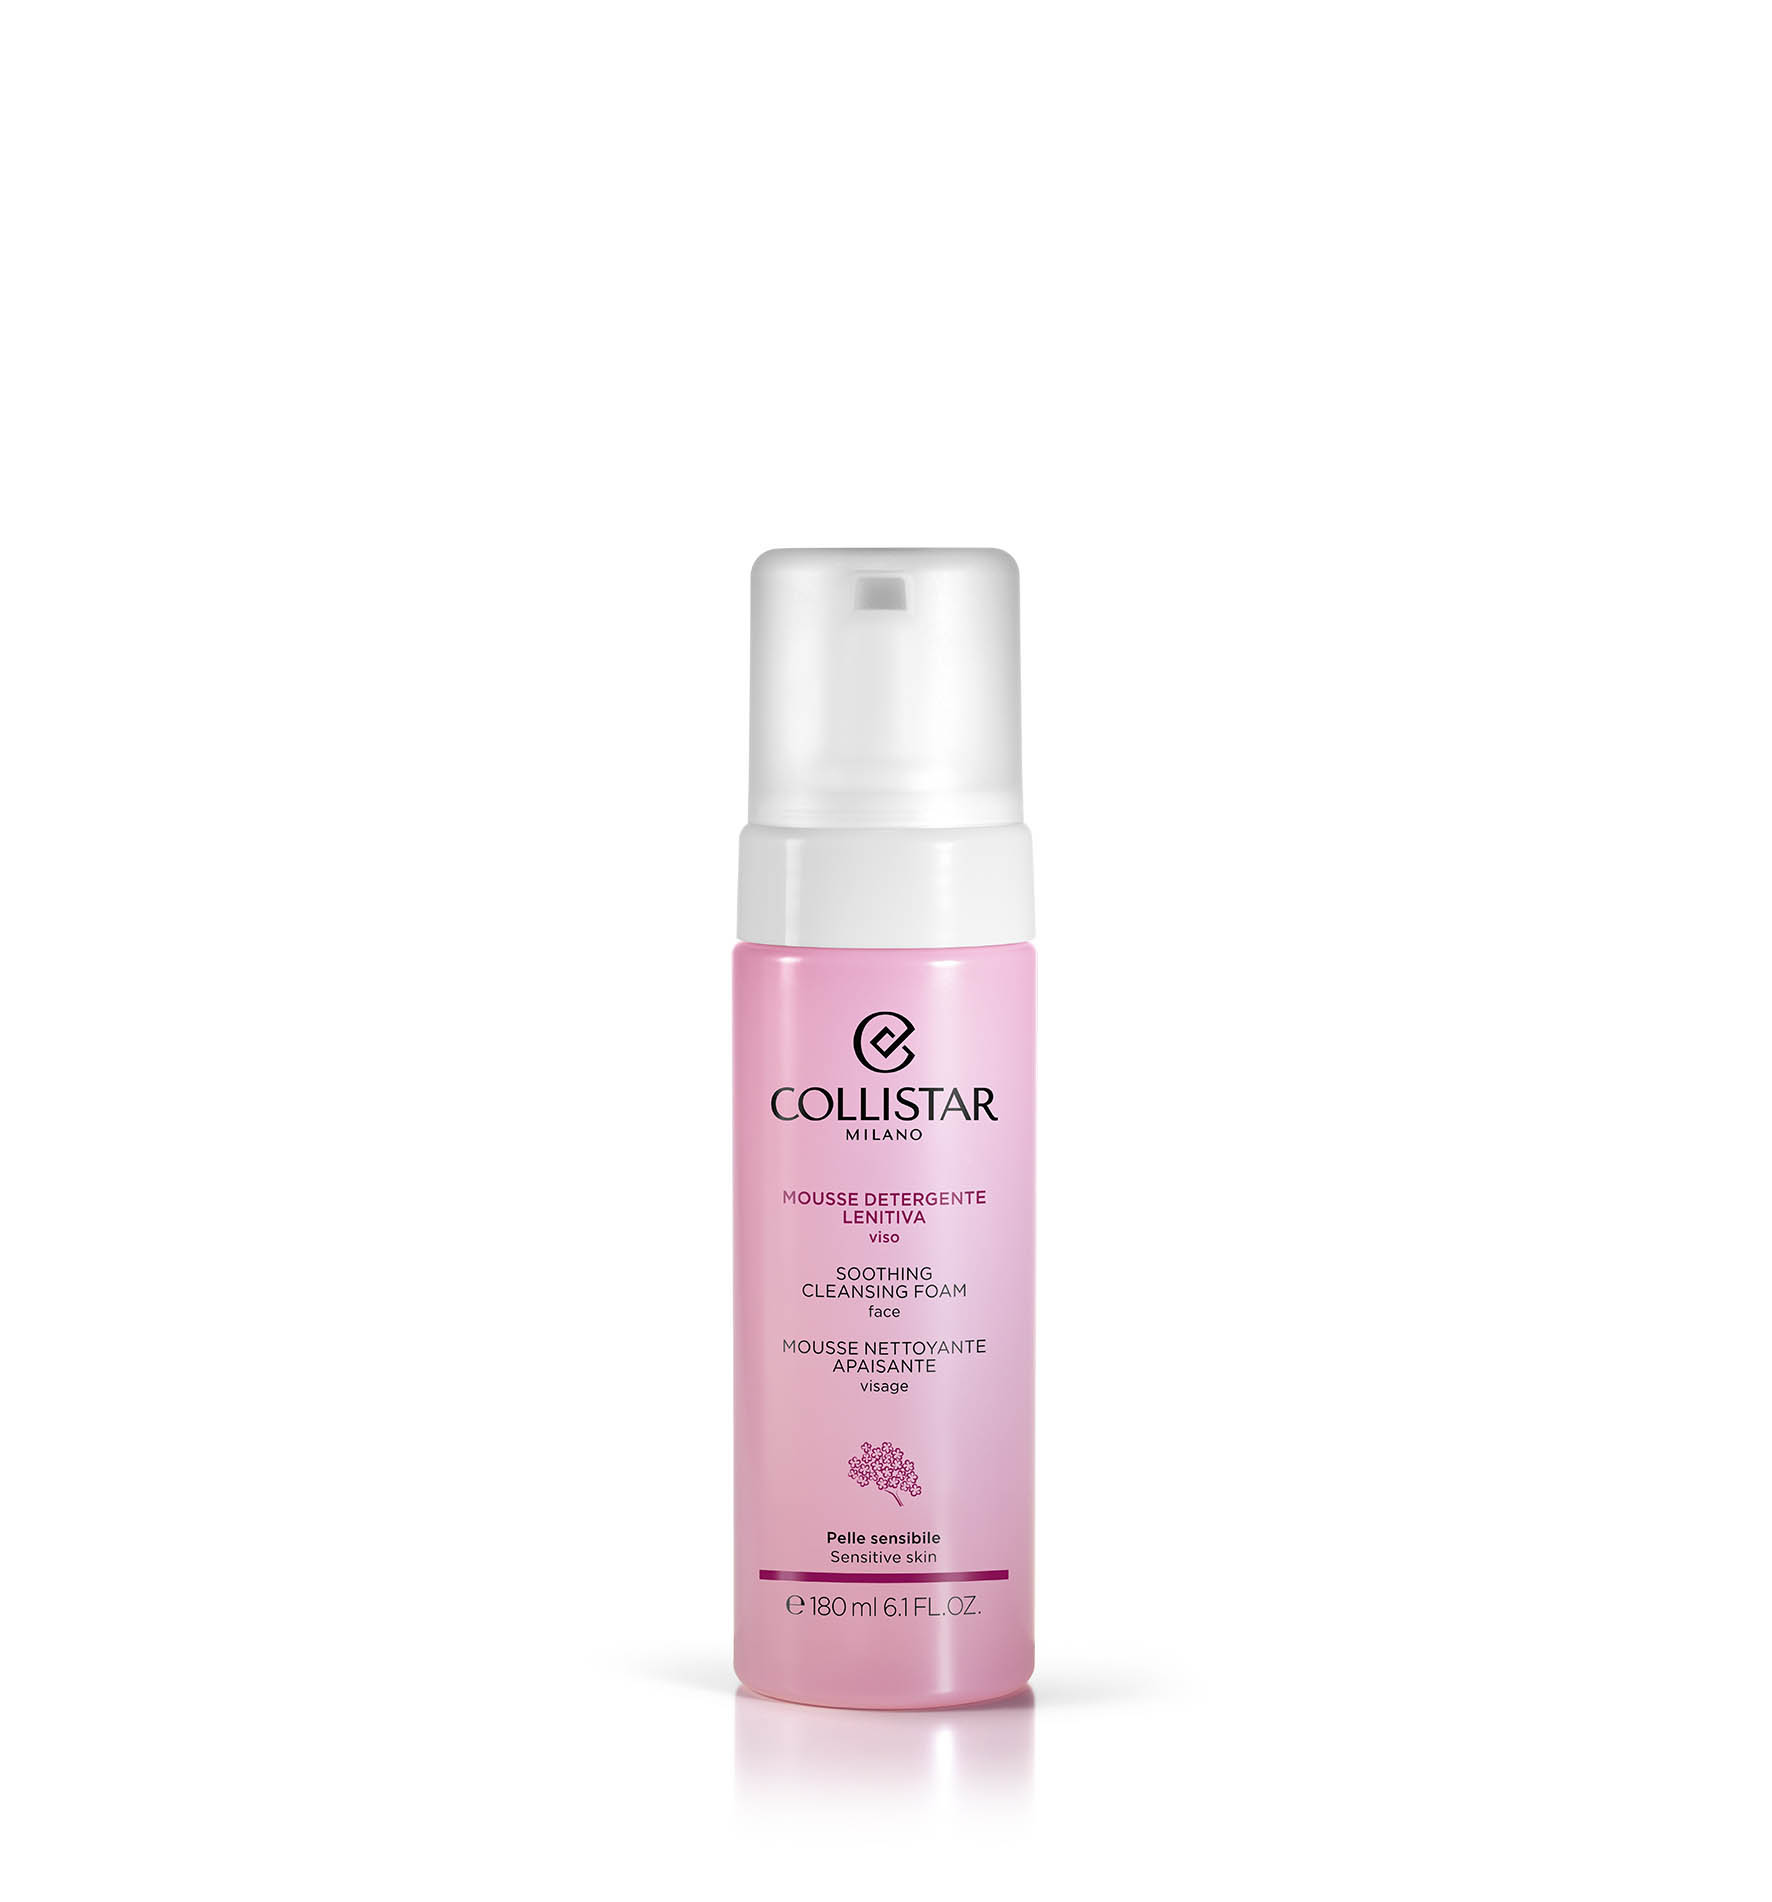 SOOTHING CLEANSING FOAM FACE - Face | Collistar - Shop Online Ufficiale